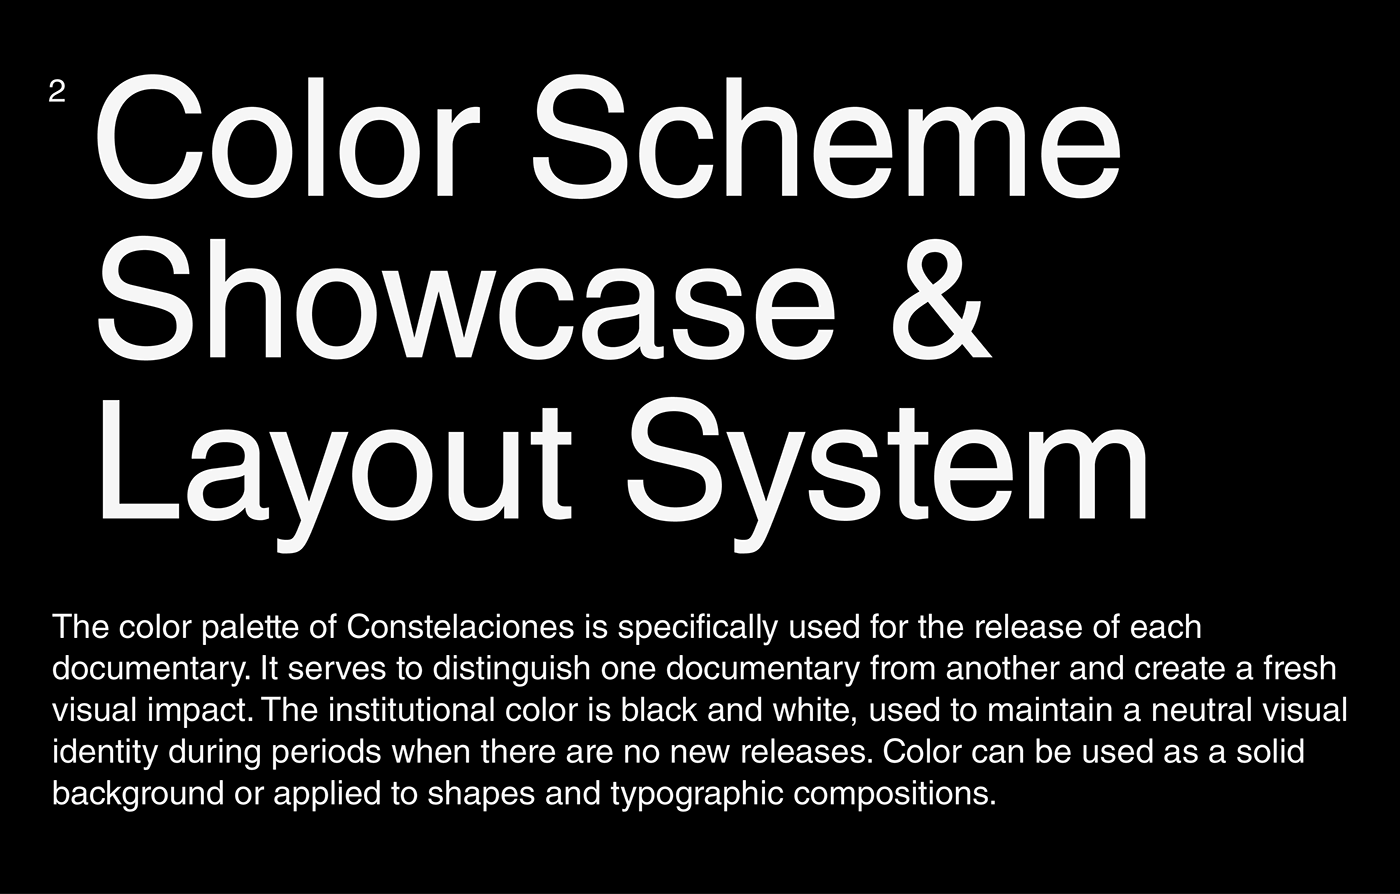 Text describing the functioning of color and information layout within the designed visual system.